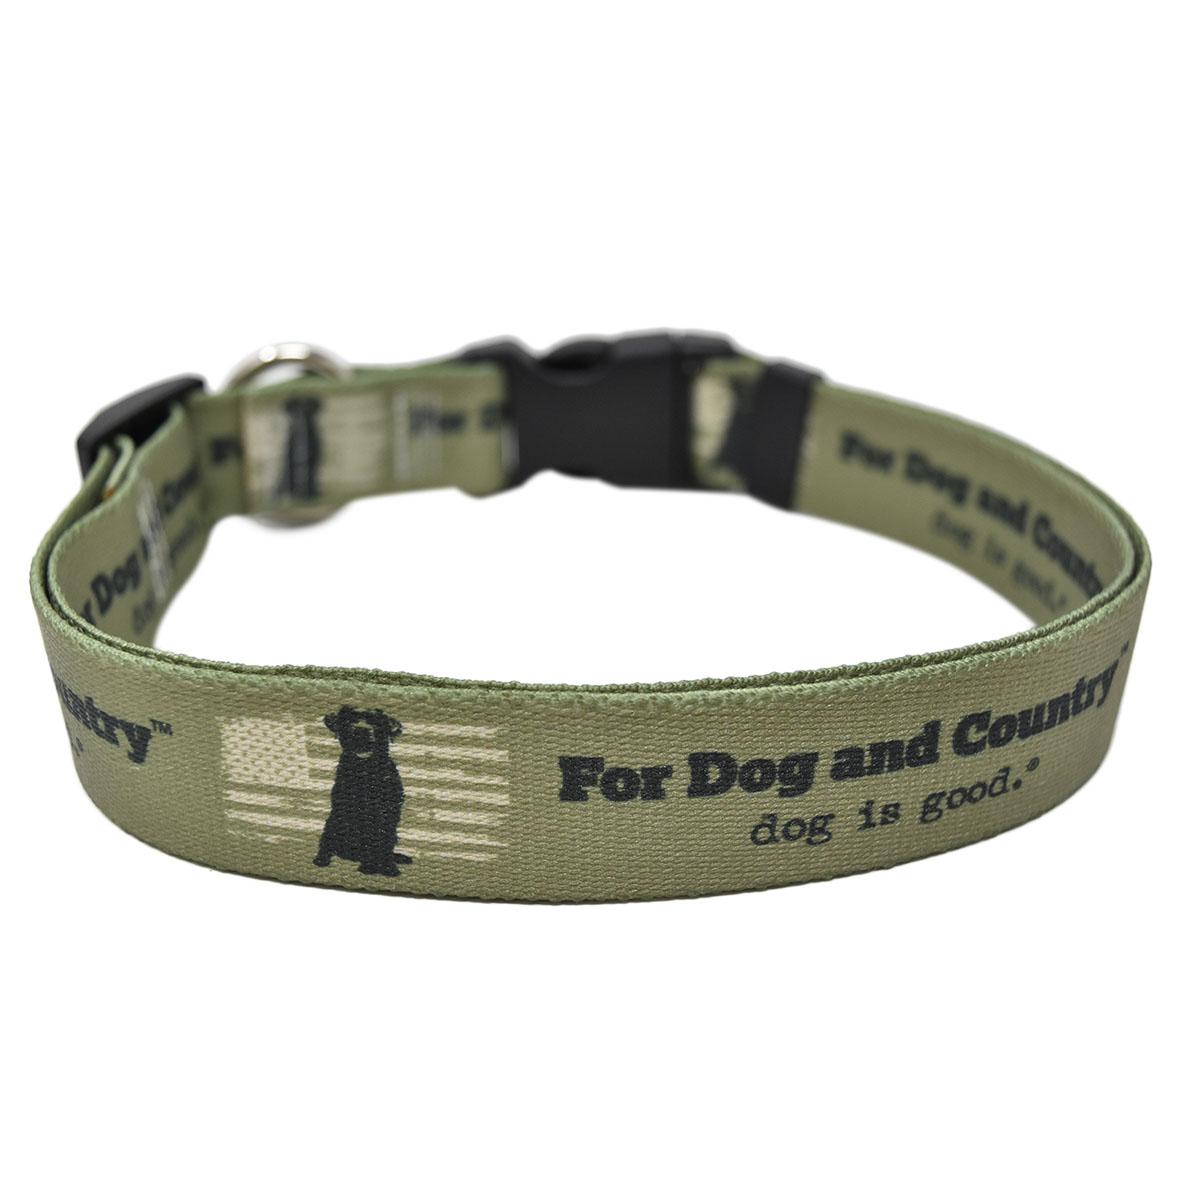 Dog is Good For Dog and Country Dog Collar - Army Green